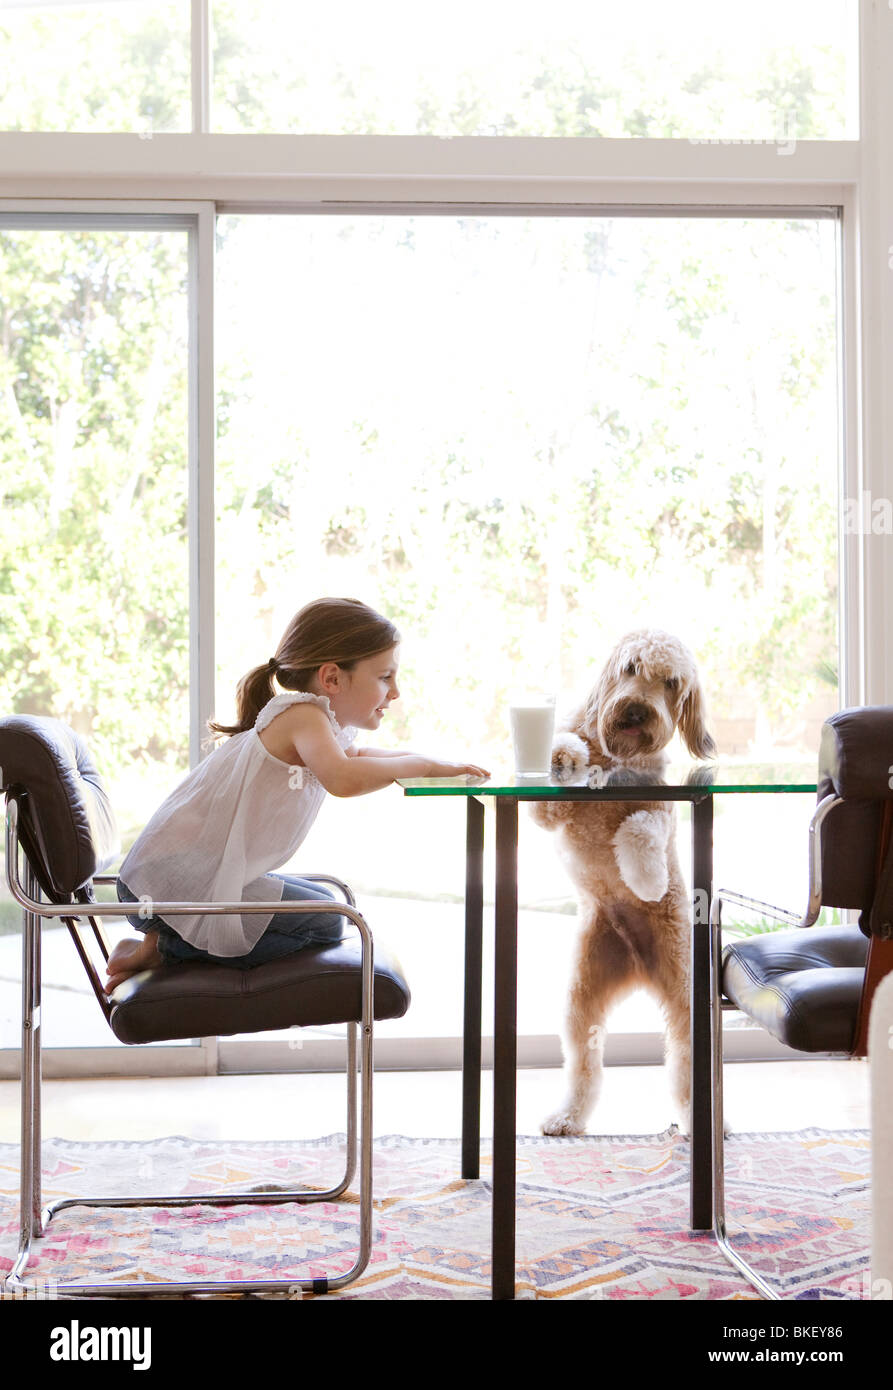 Young girl and dog at modern table with glass of milk Stock Photo